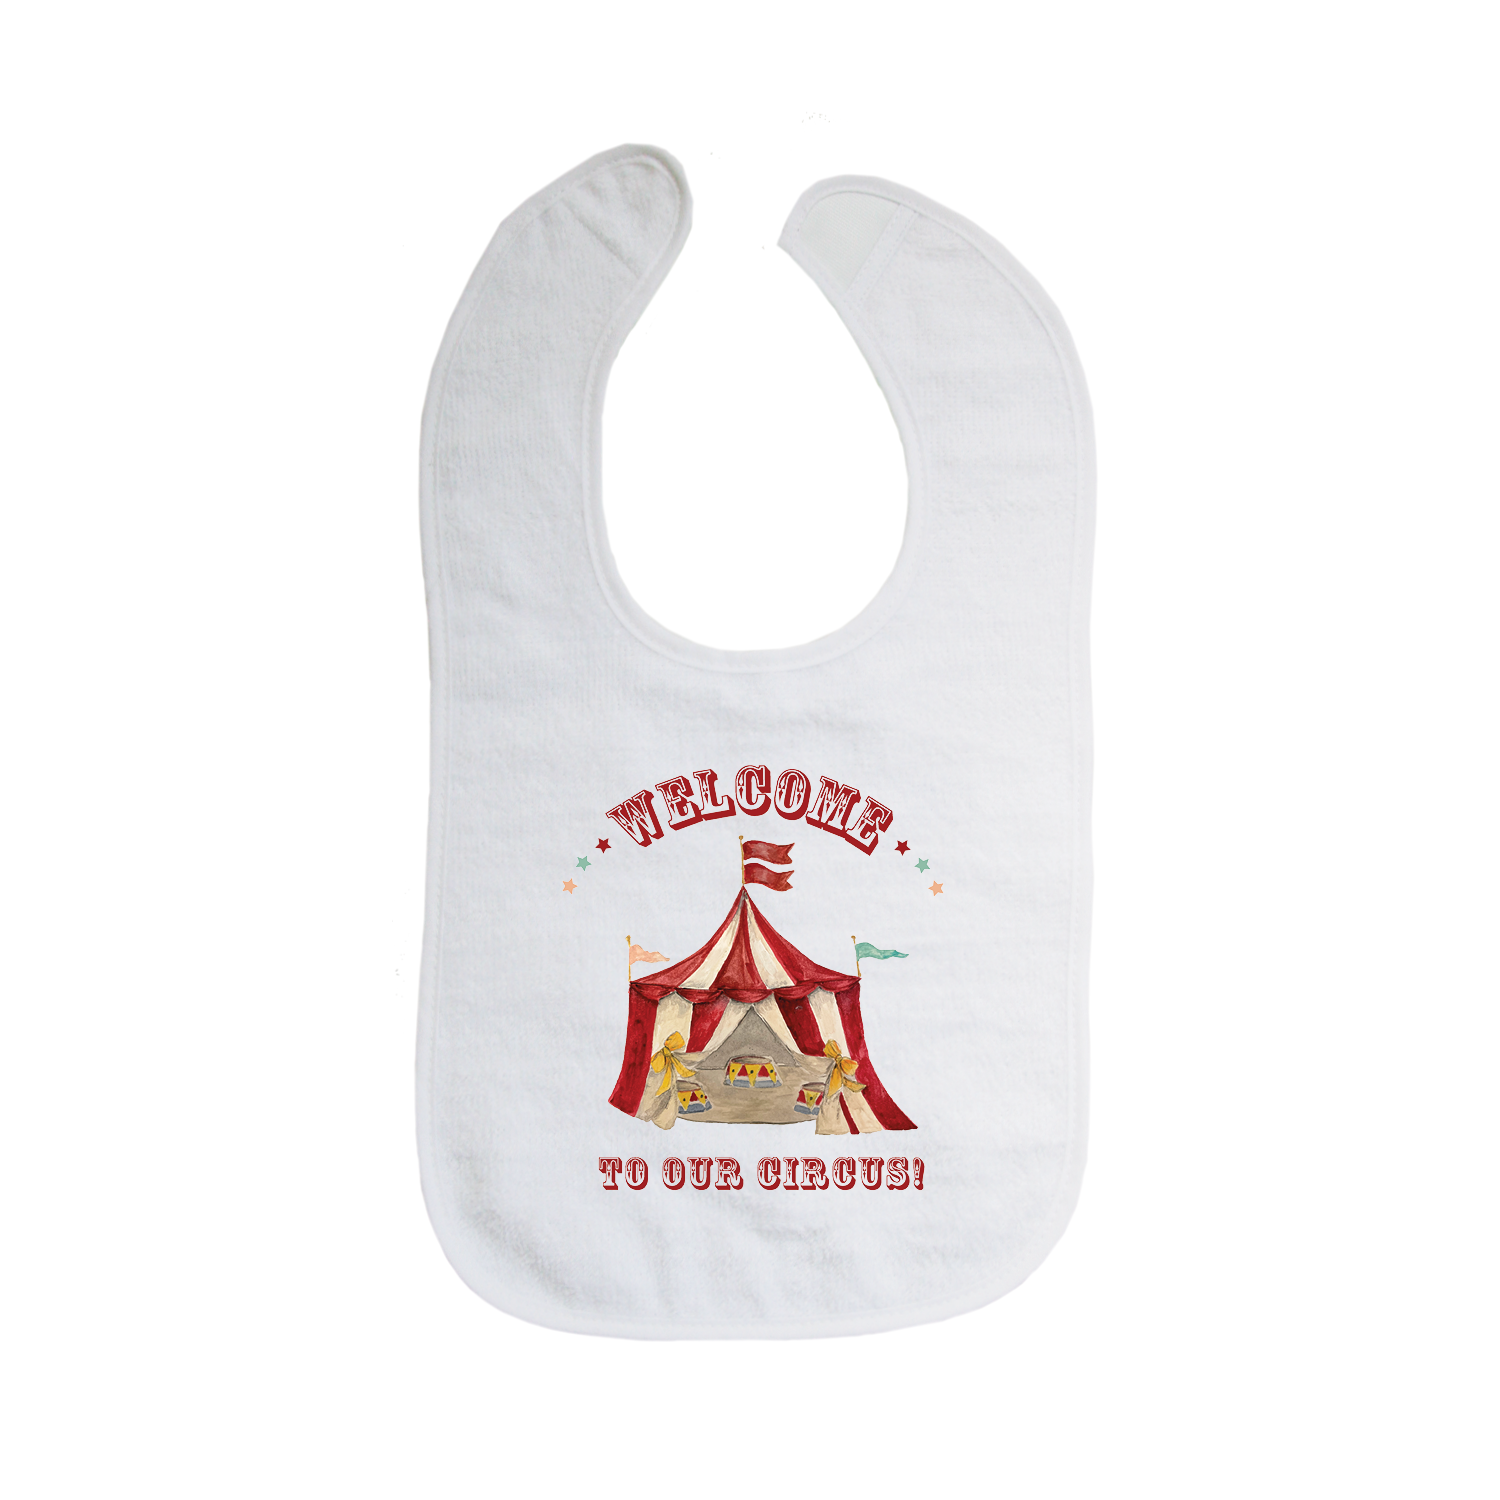 welcome to our circus bib